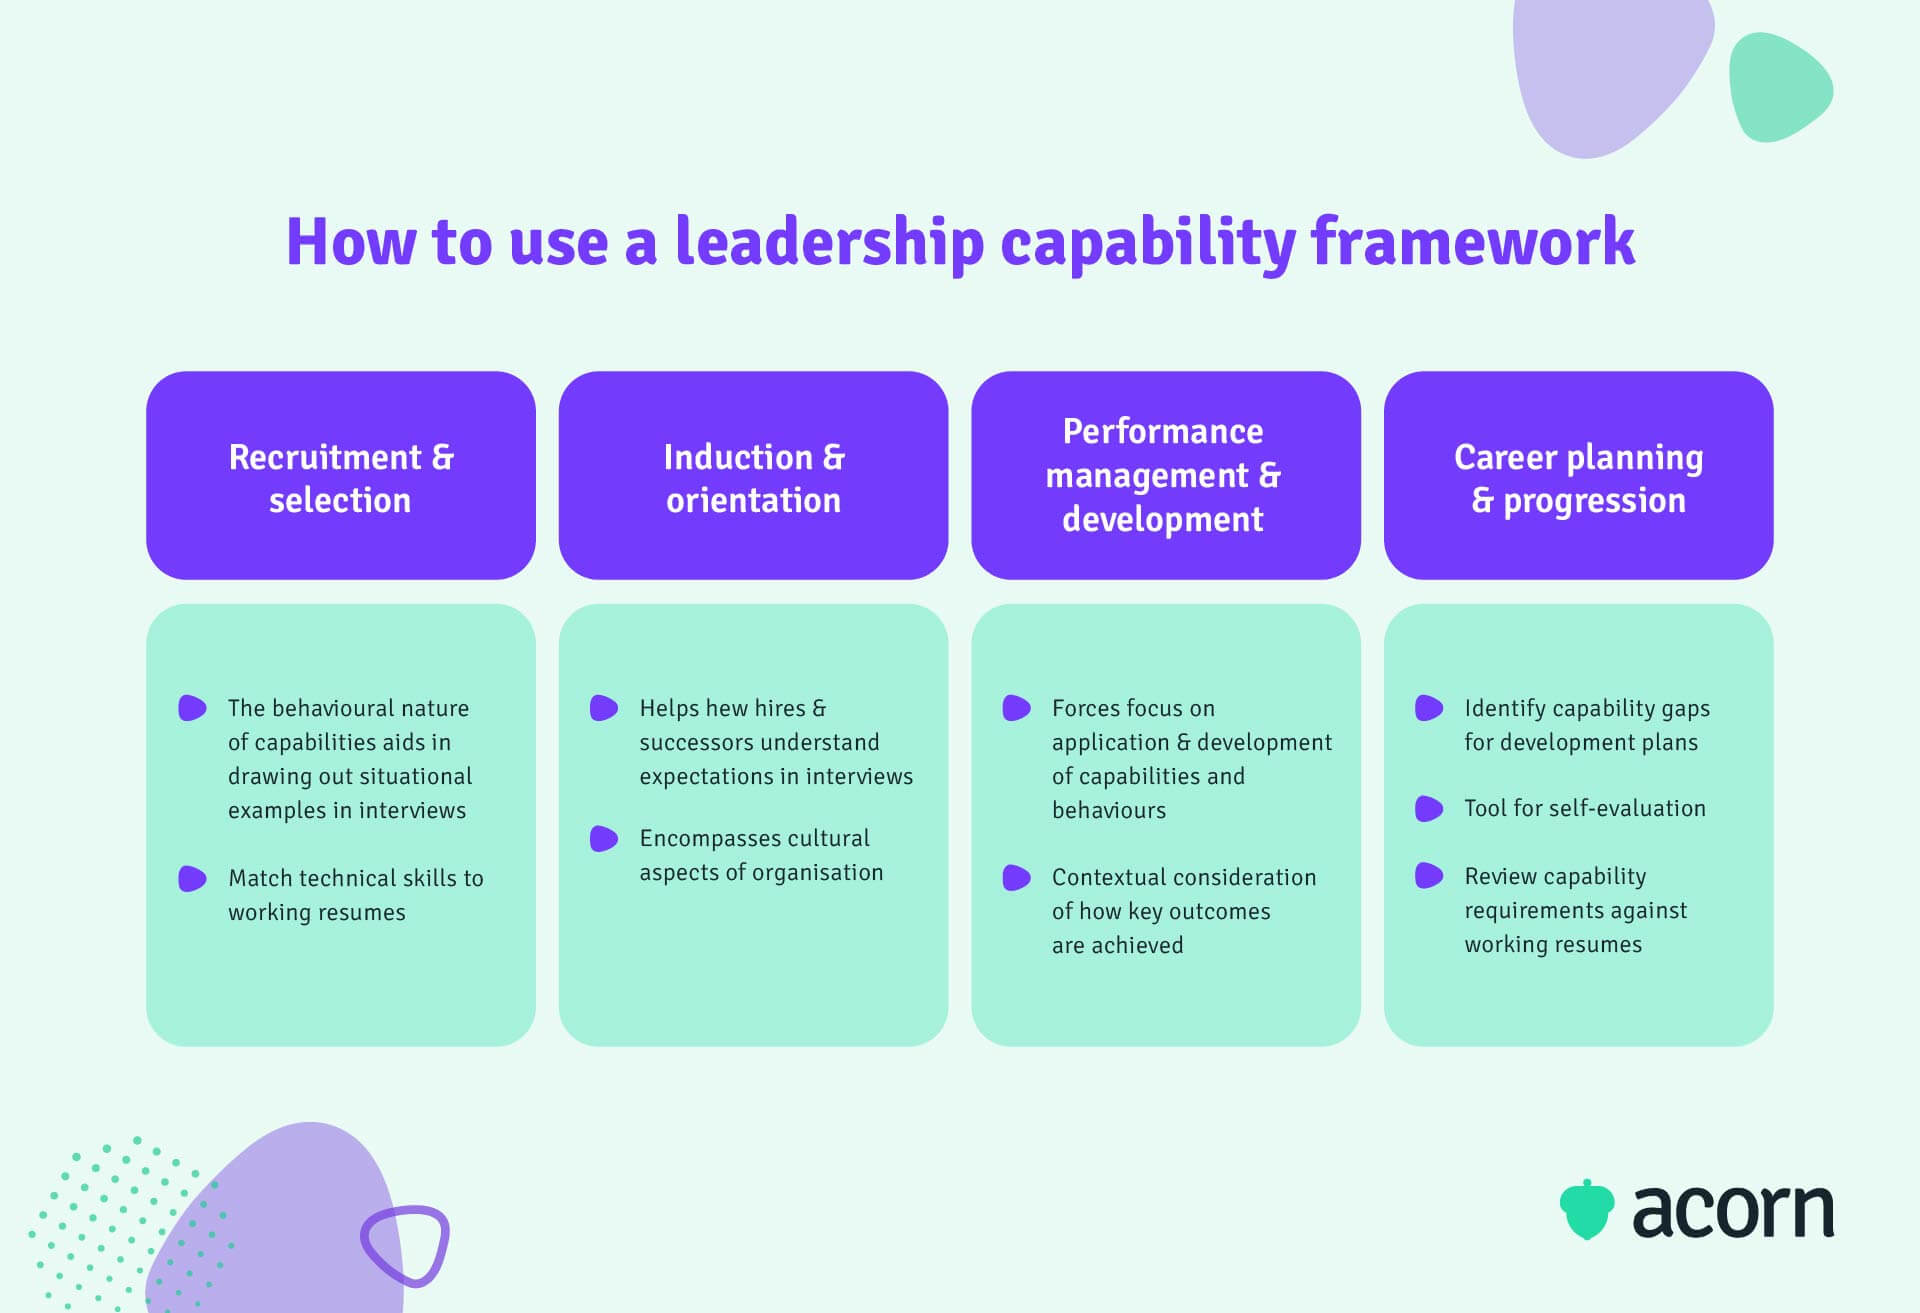 Table showing four points of the employee lifecycle aided by a leadership capability framework